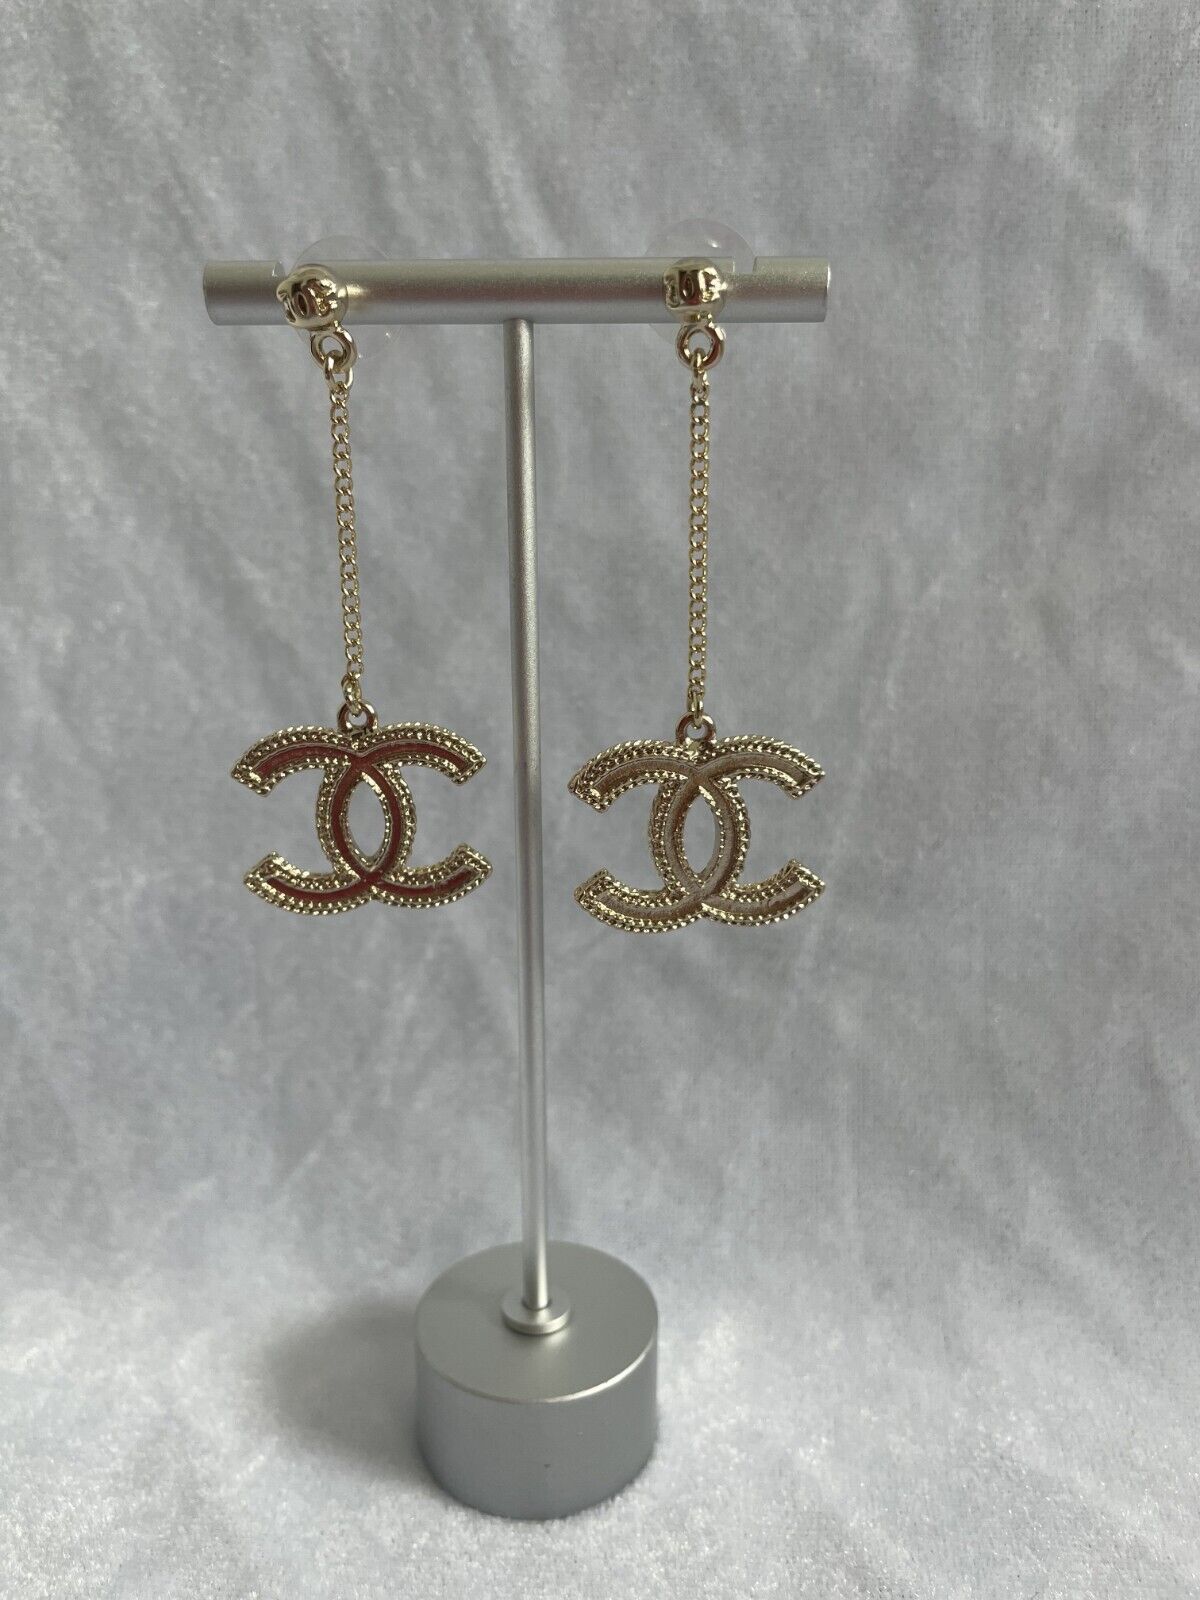 CHANEL Gold EARRINGS 100% AUTHENTIC